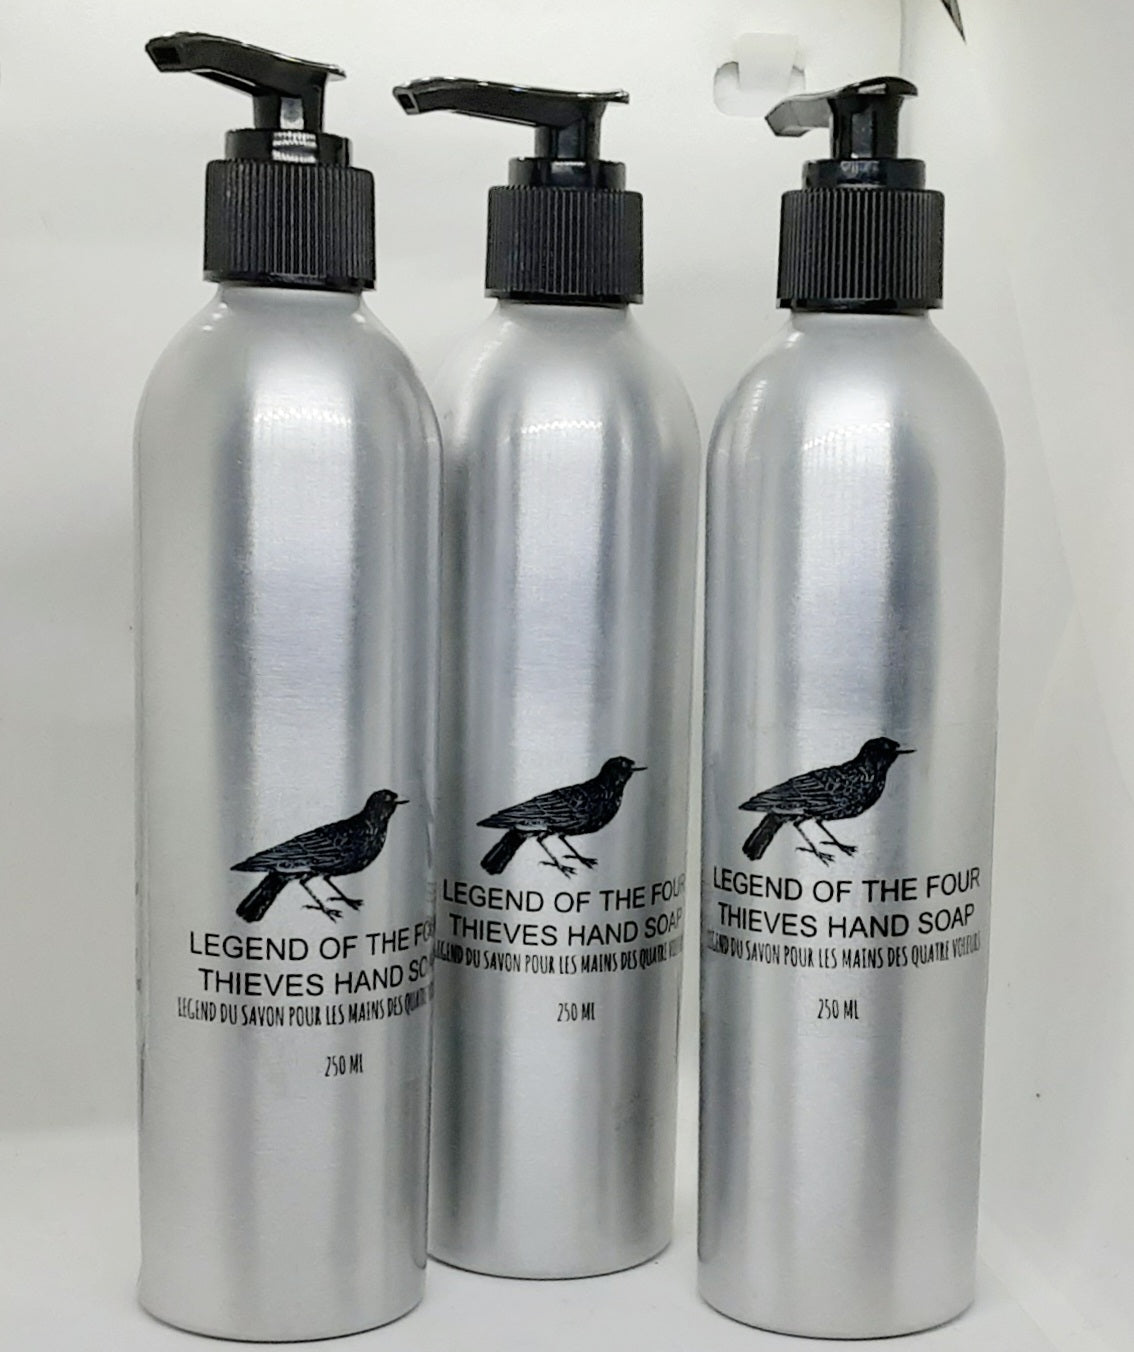 Legend of the Four Thieves Liquid Hand Soap